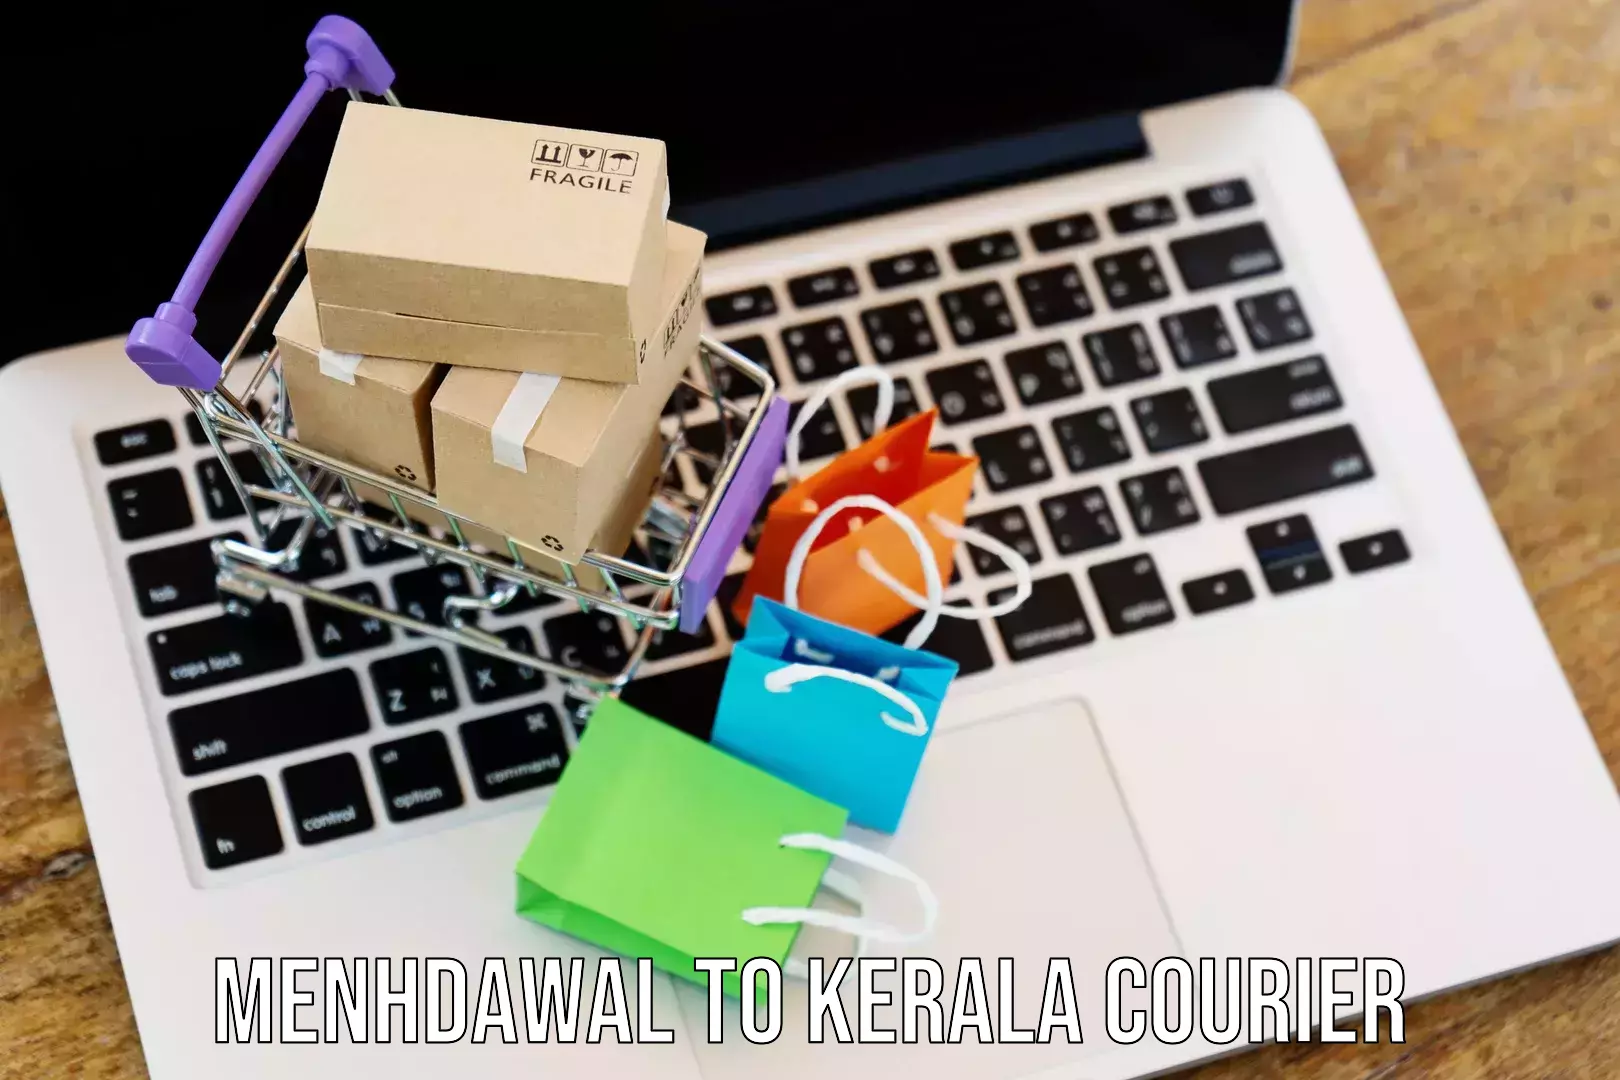 User-friendly courier app Menhdawal to Parappa